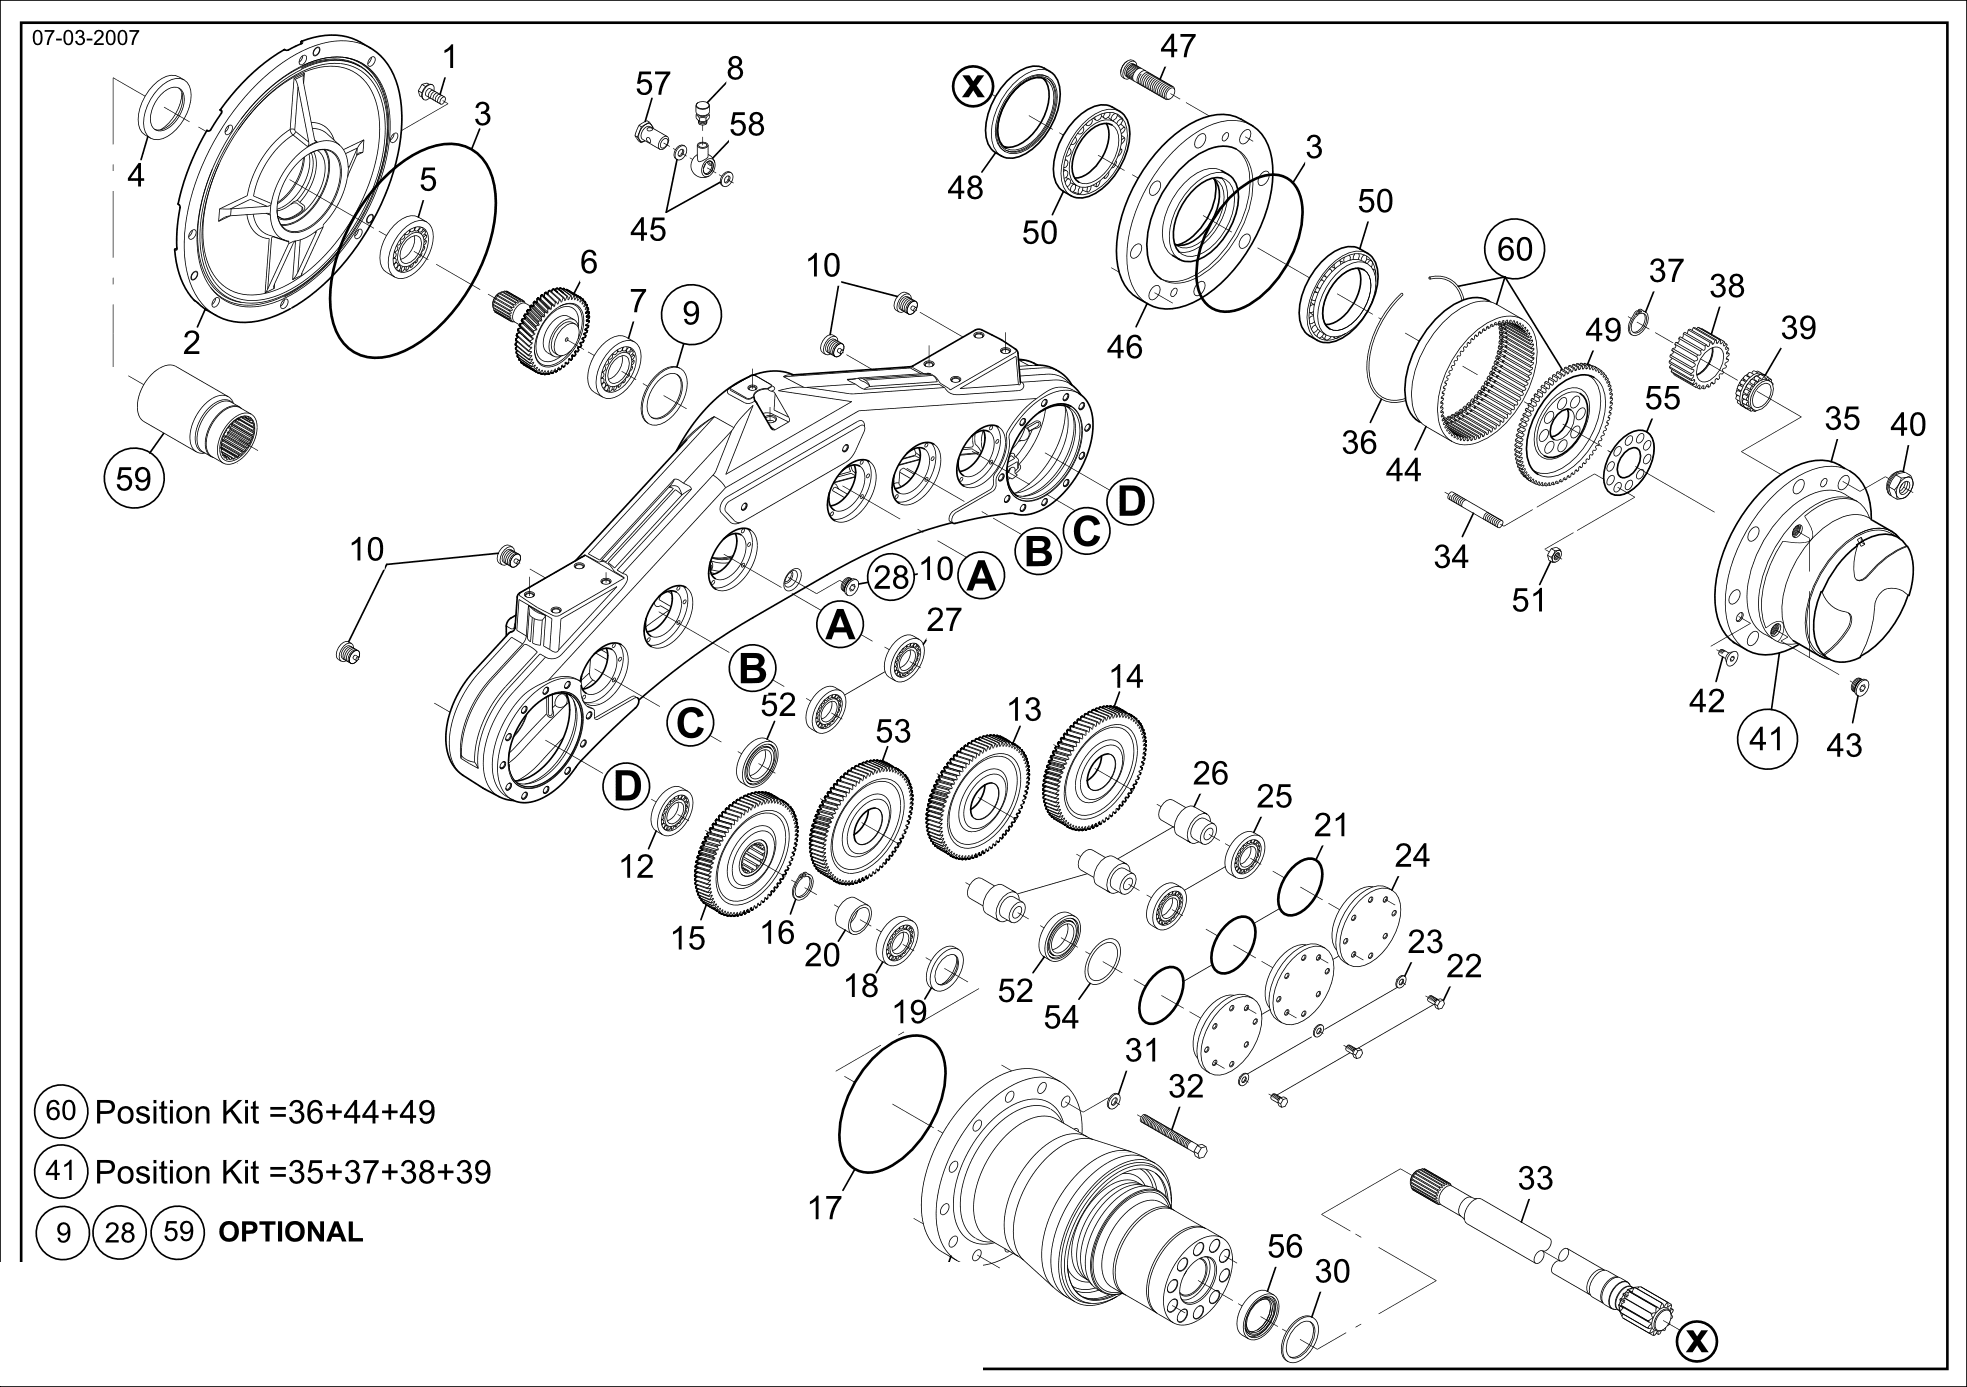 drawing for CNH NEW HOLLAND 75288912 - BALL BEARING (figure 2)